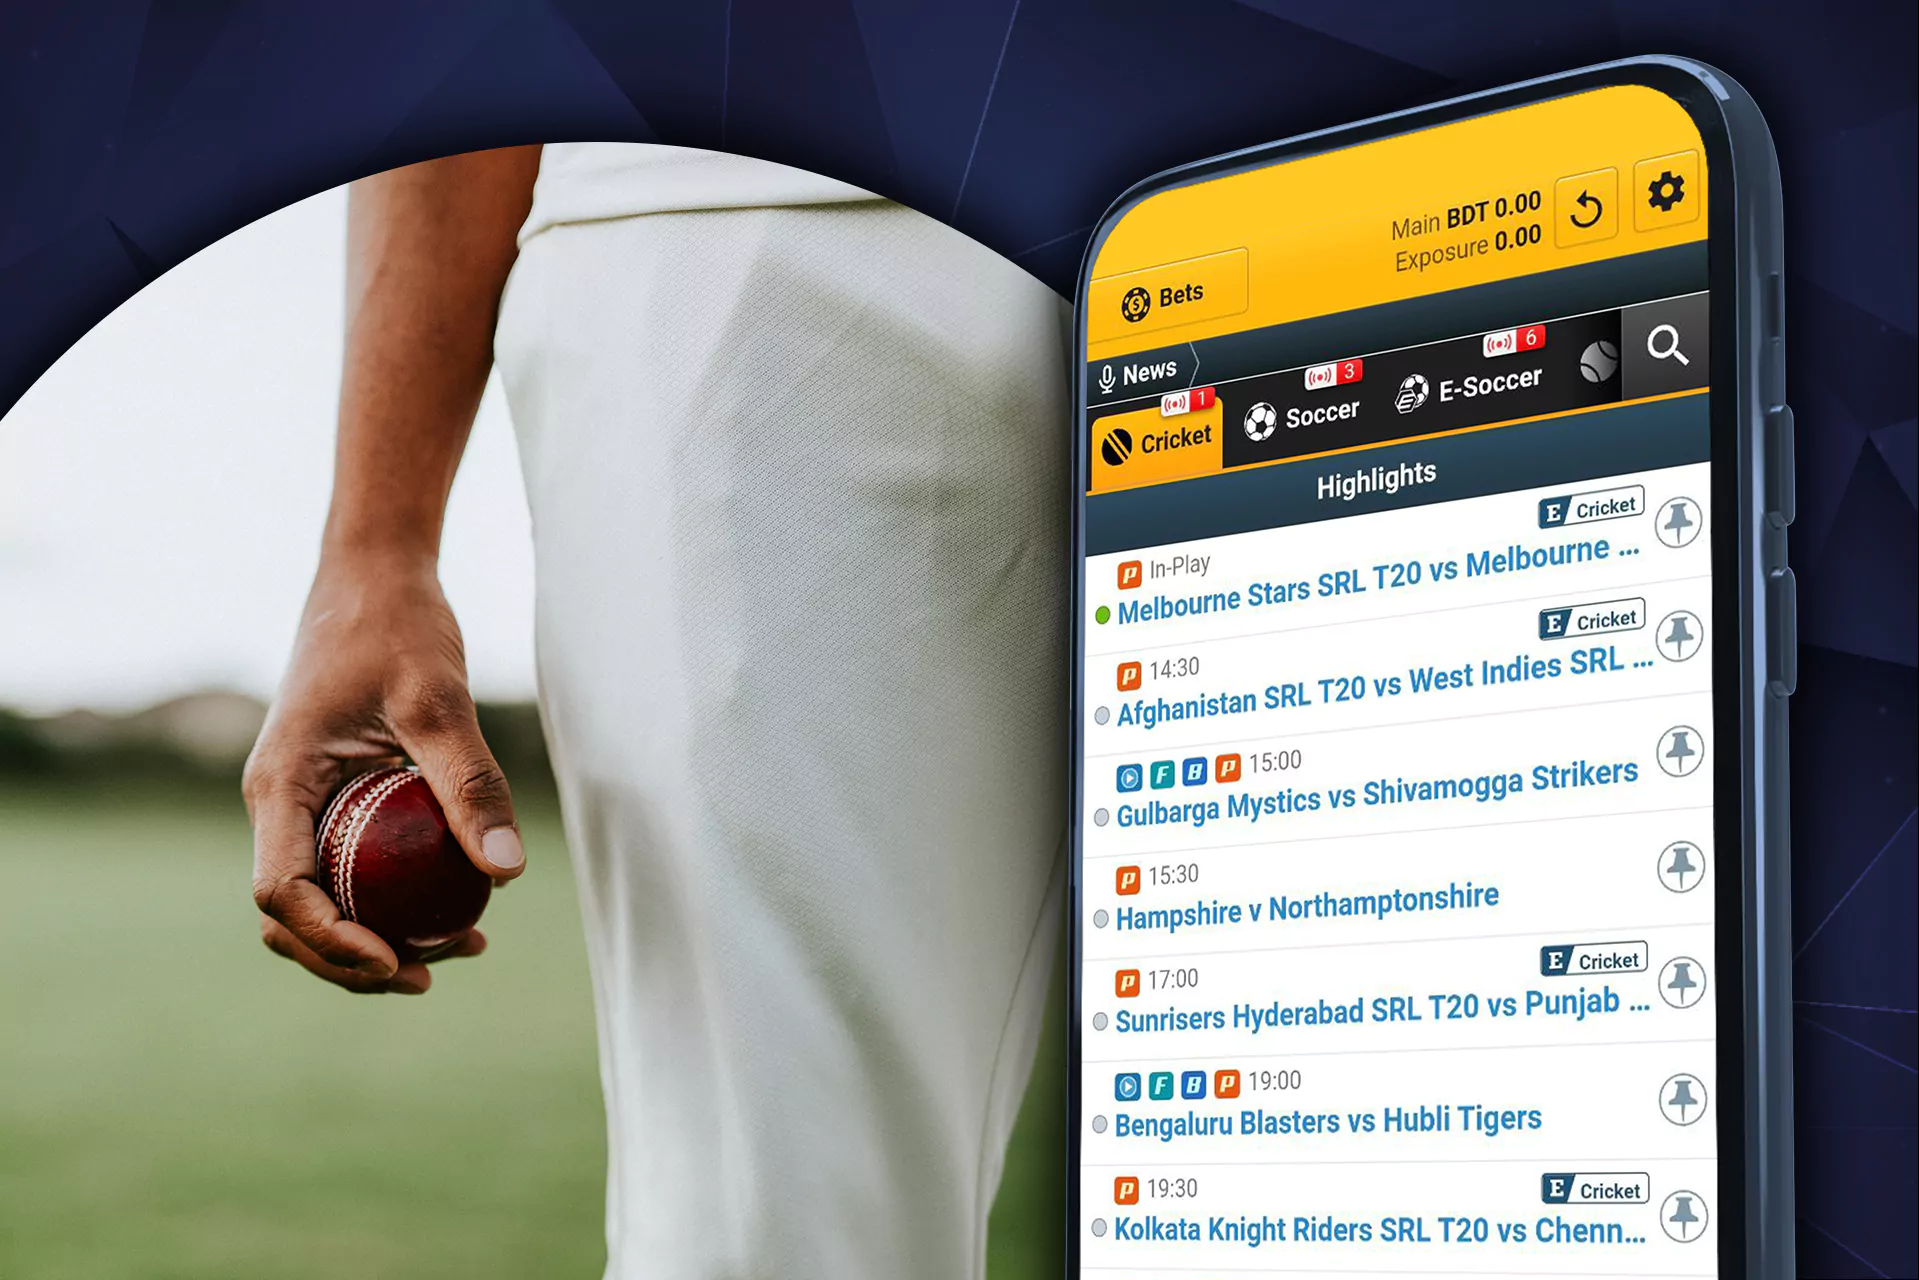 Place bets on cricket via the ICCWIN mobile app.